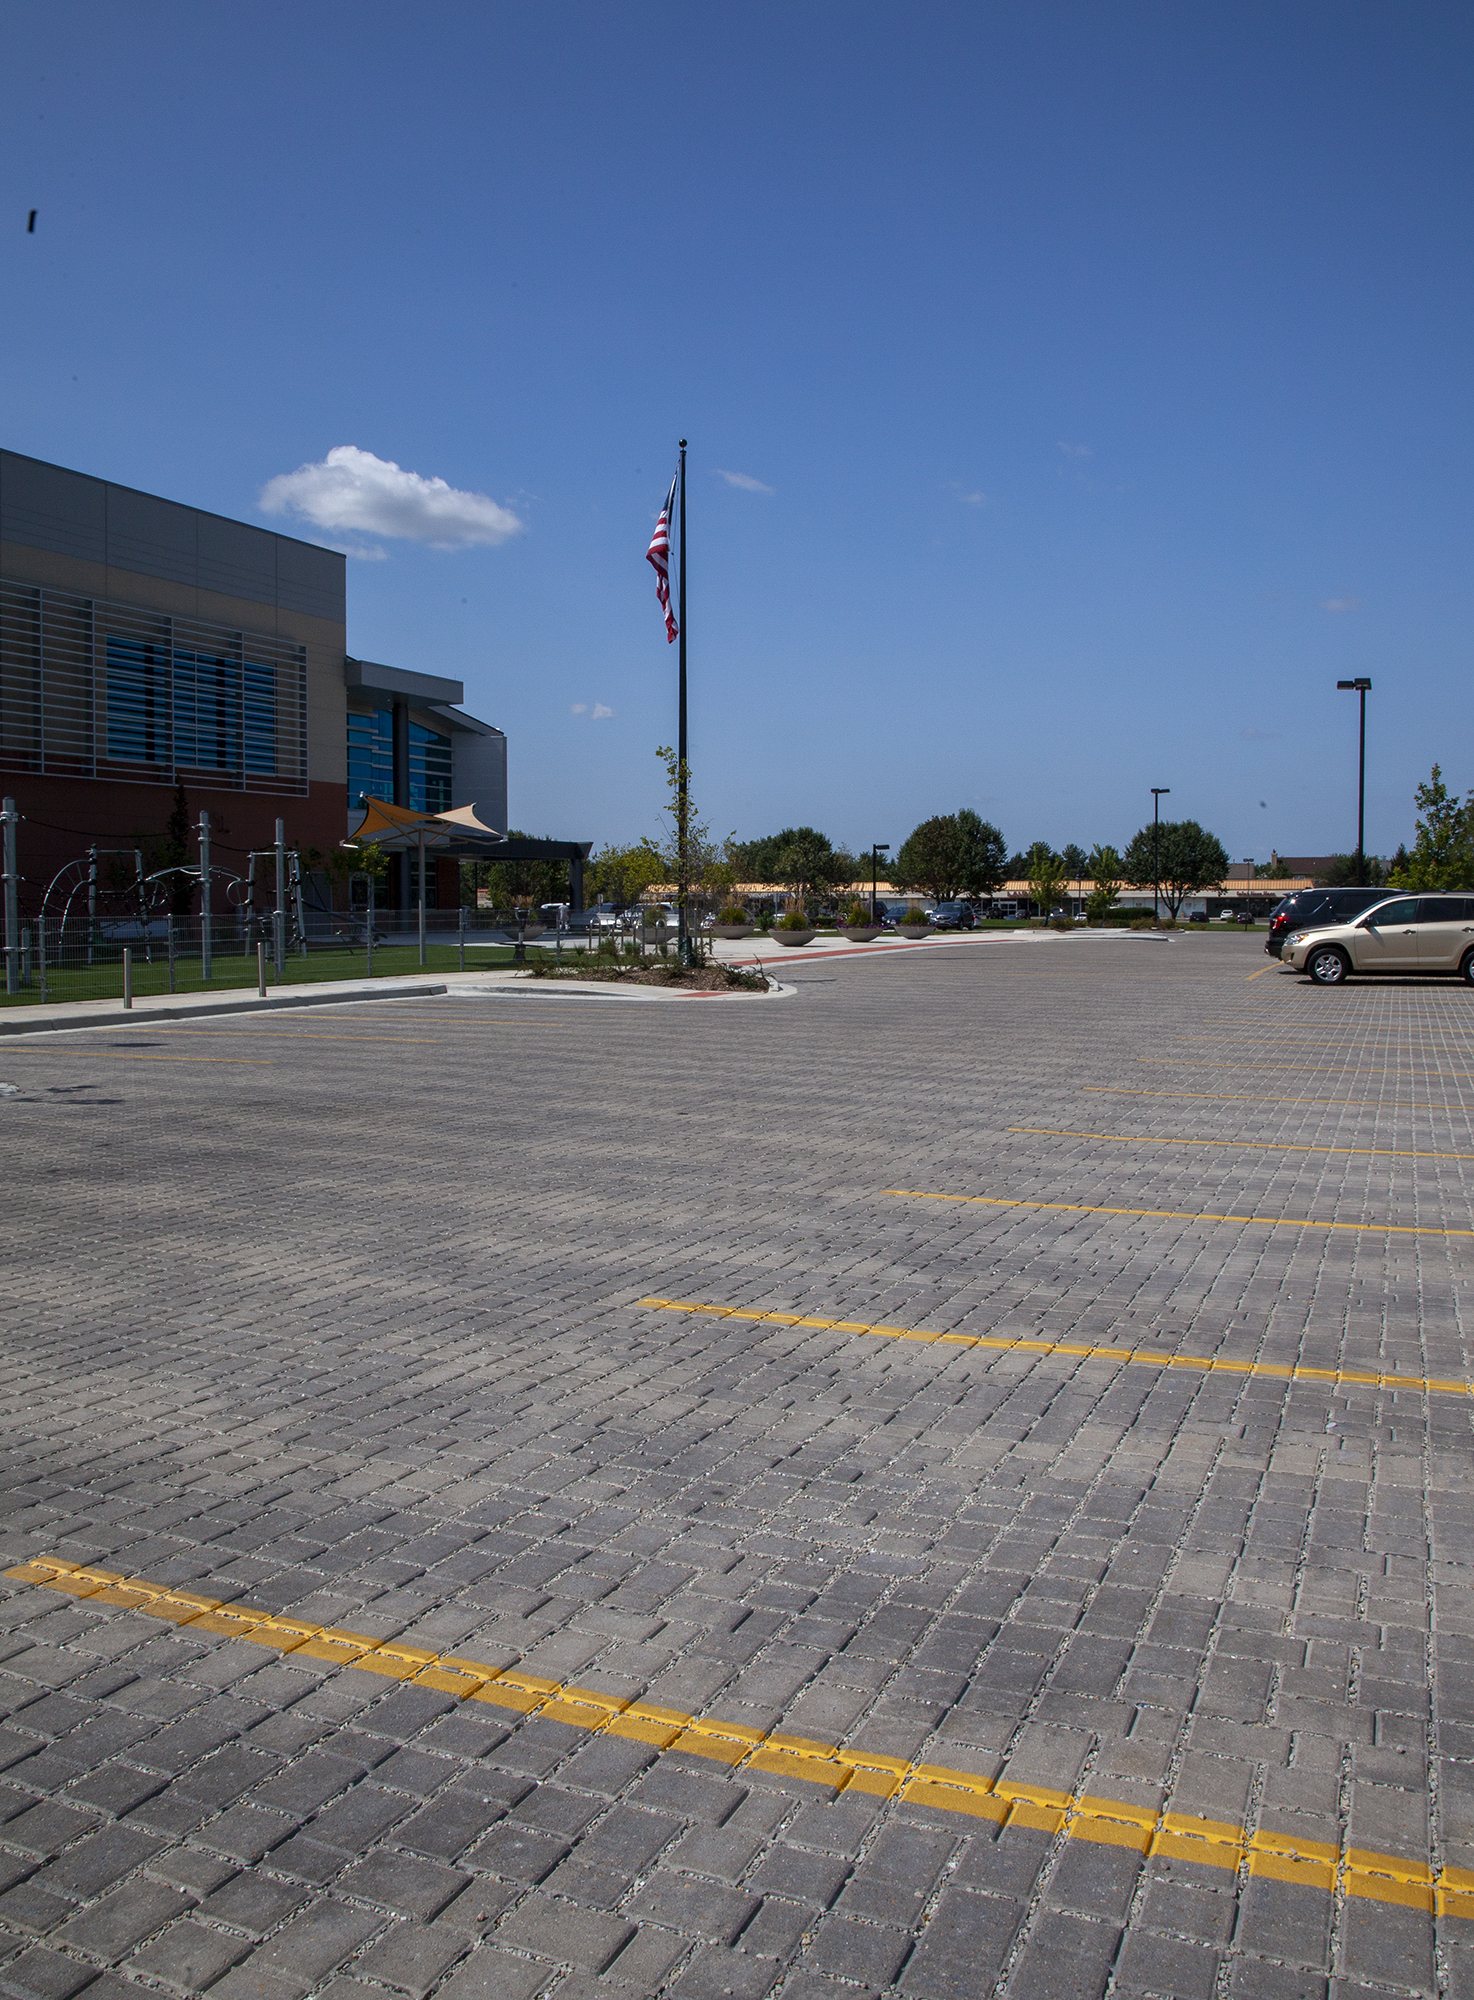 Cars park in between yellow lines on Eco-Optiloc permeable pavers in front of the Athletic and Recreation Center in Woodridge Illinois.